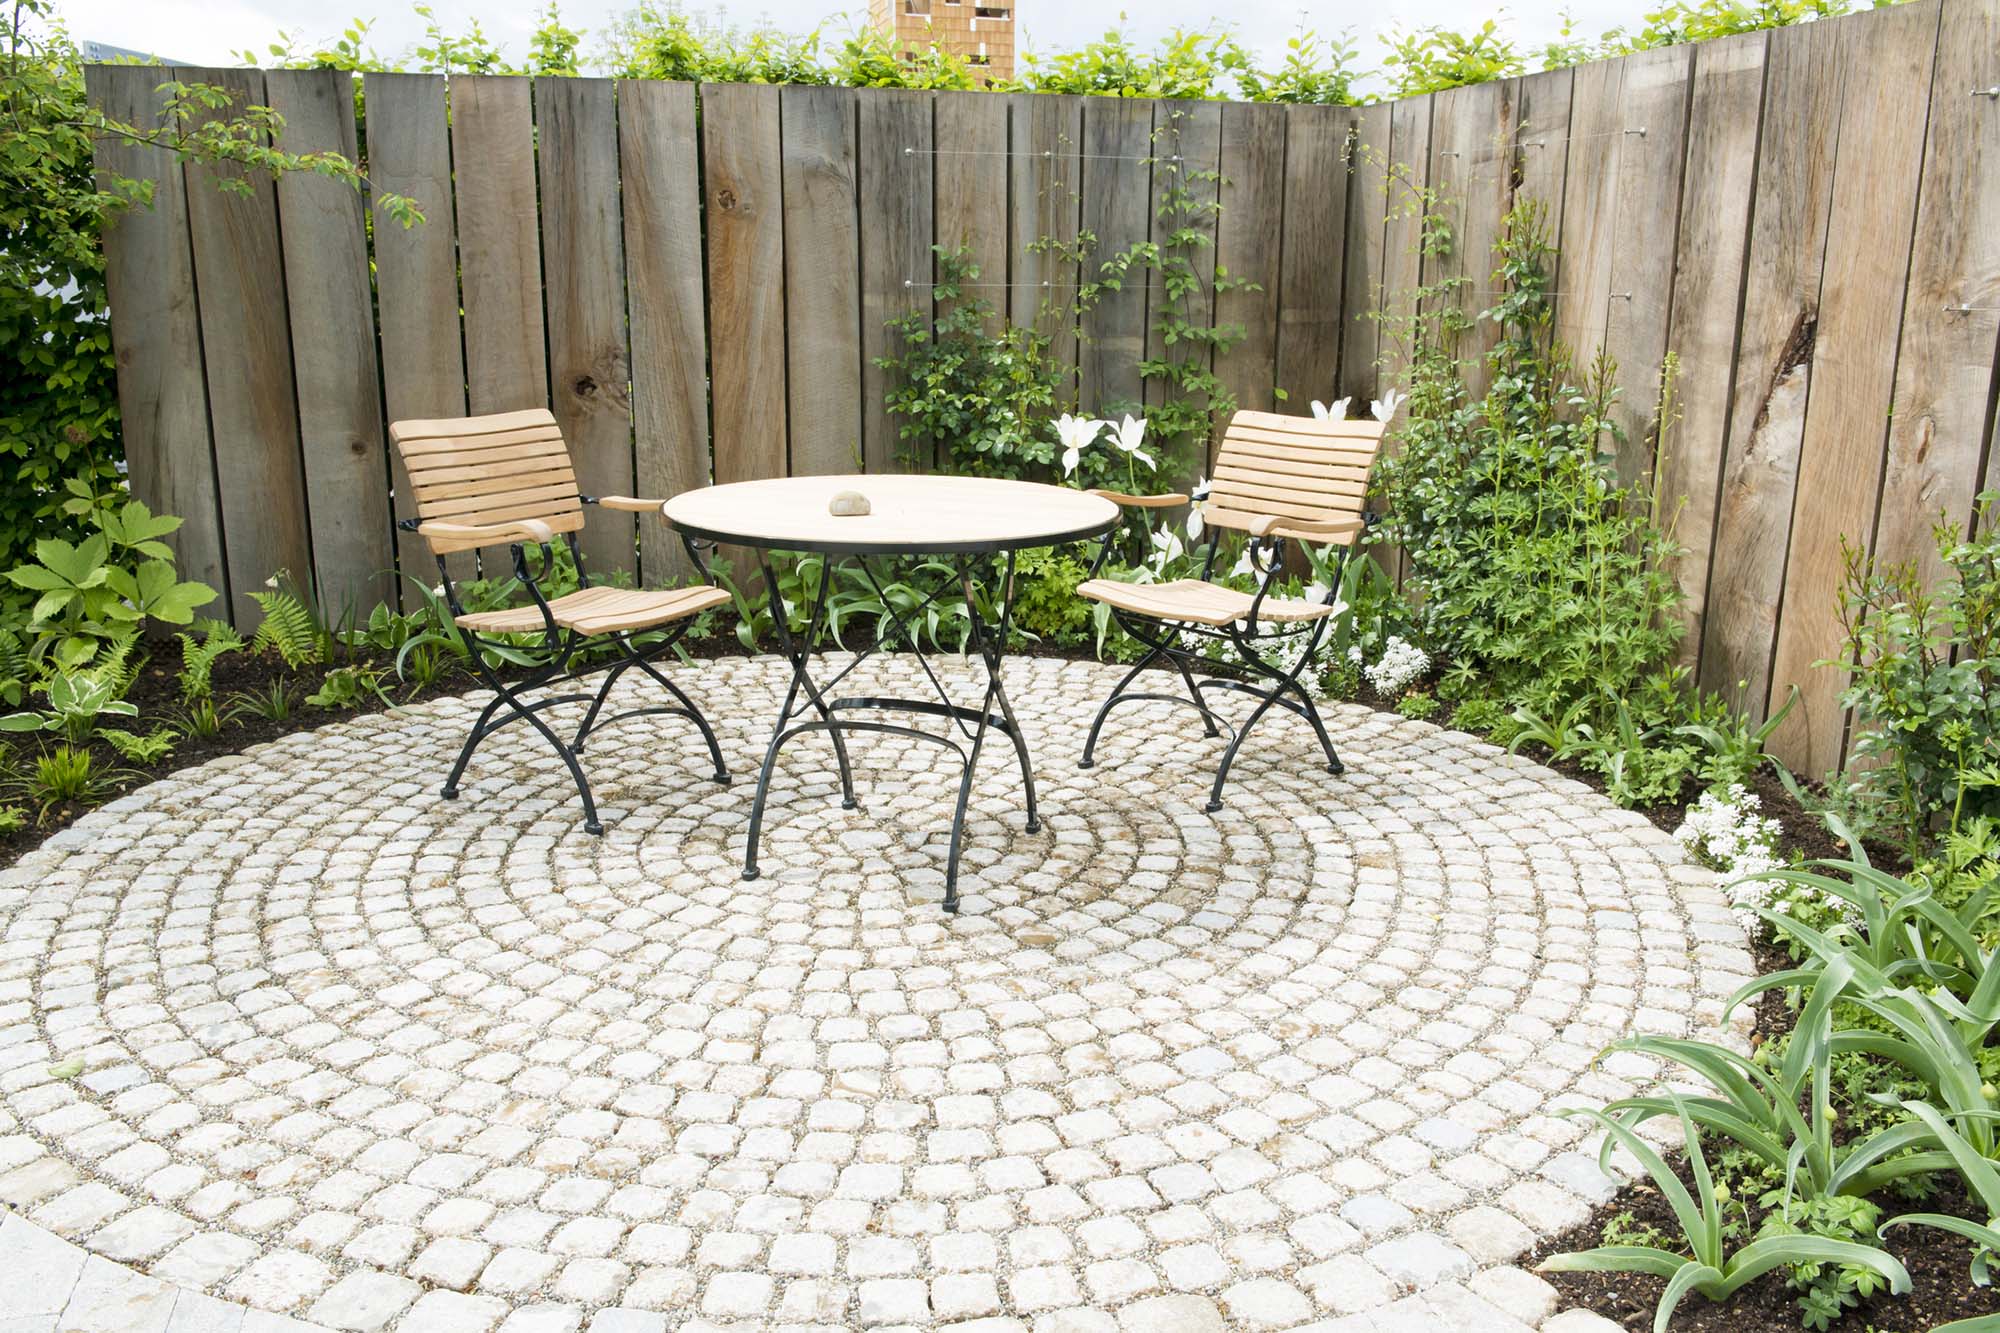 Paved patio area with metal table & chairs